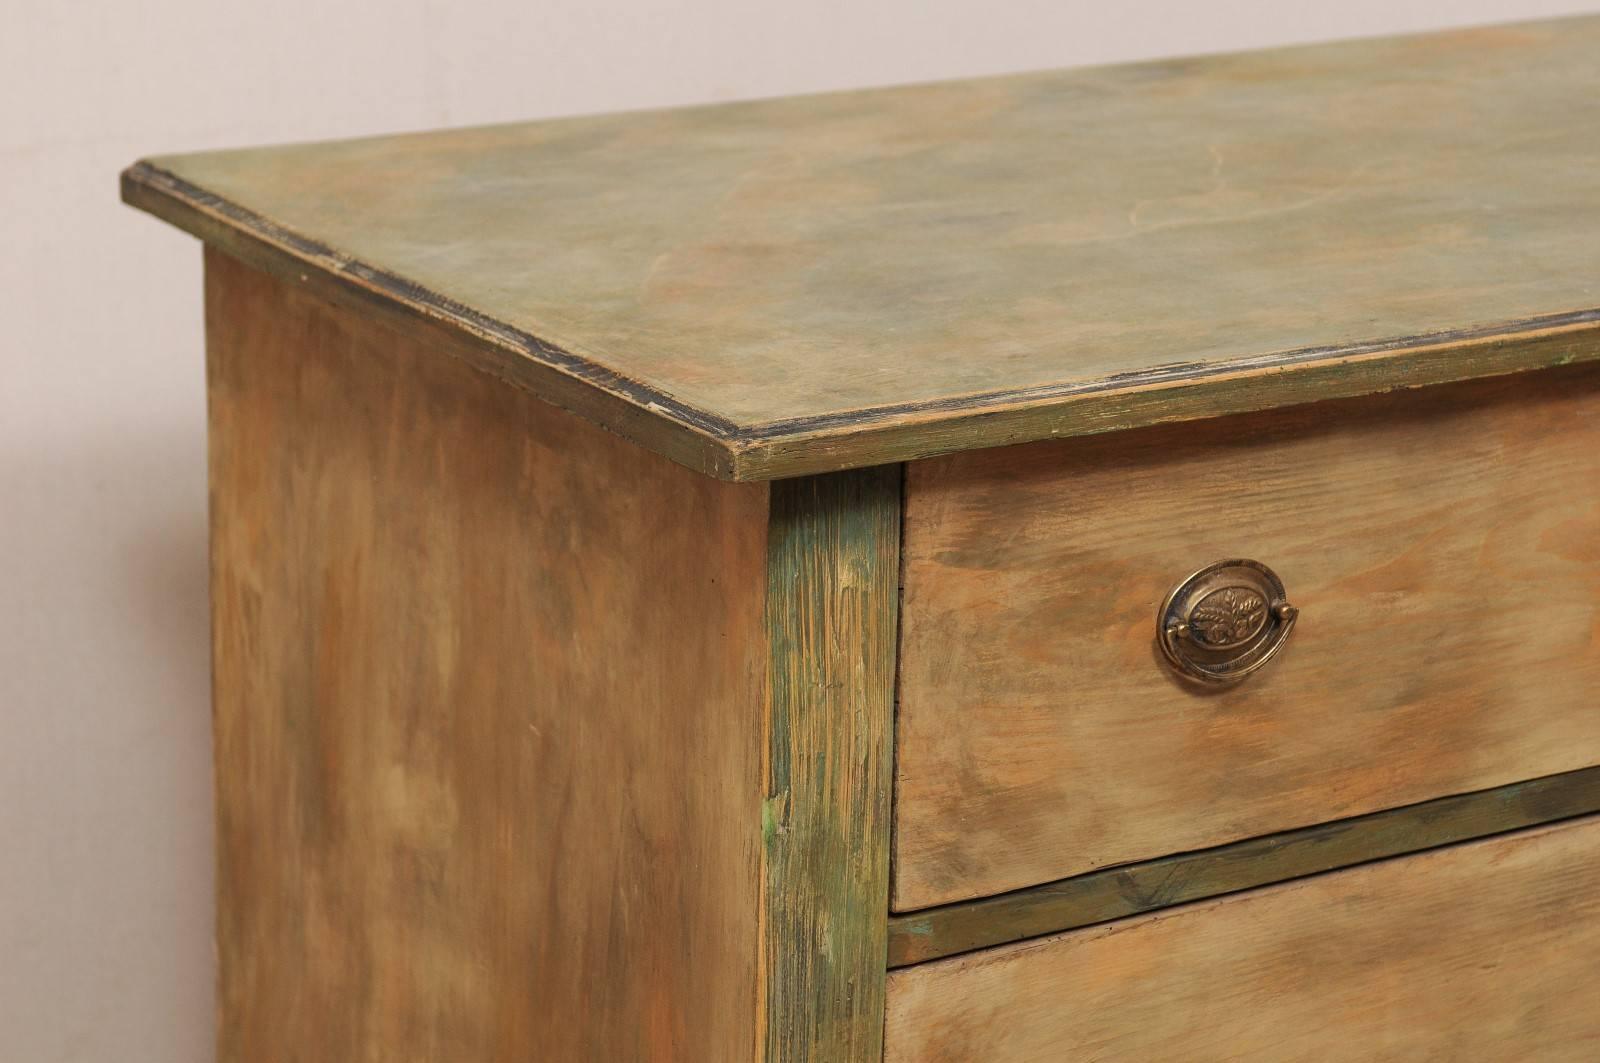 Carved 19th Century, Swedish Painted Wood Chest of Drawers in Beige and Green